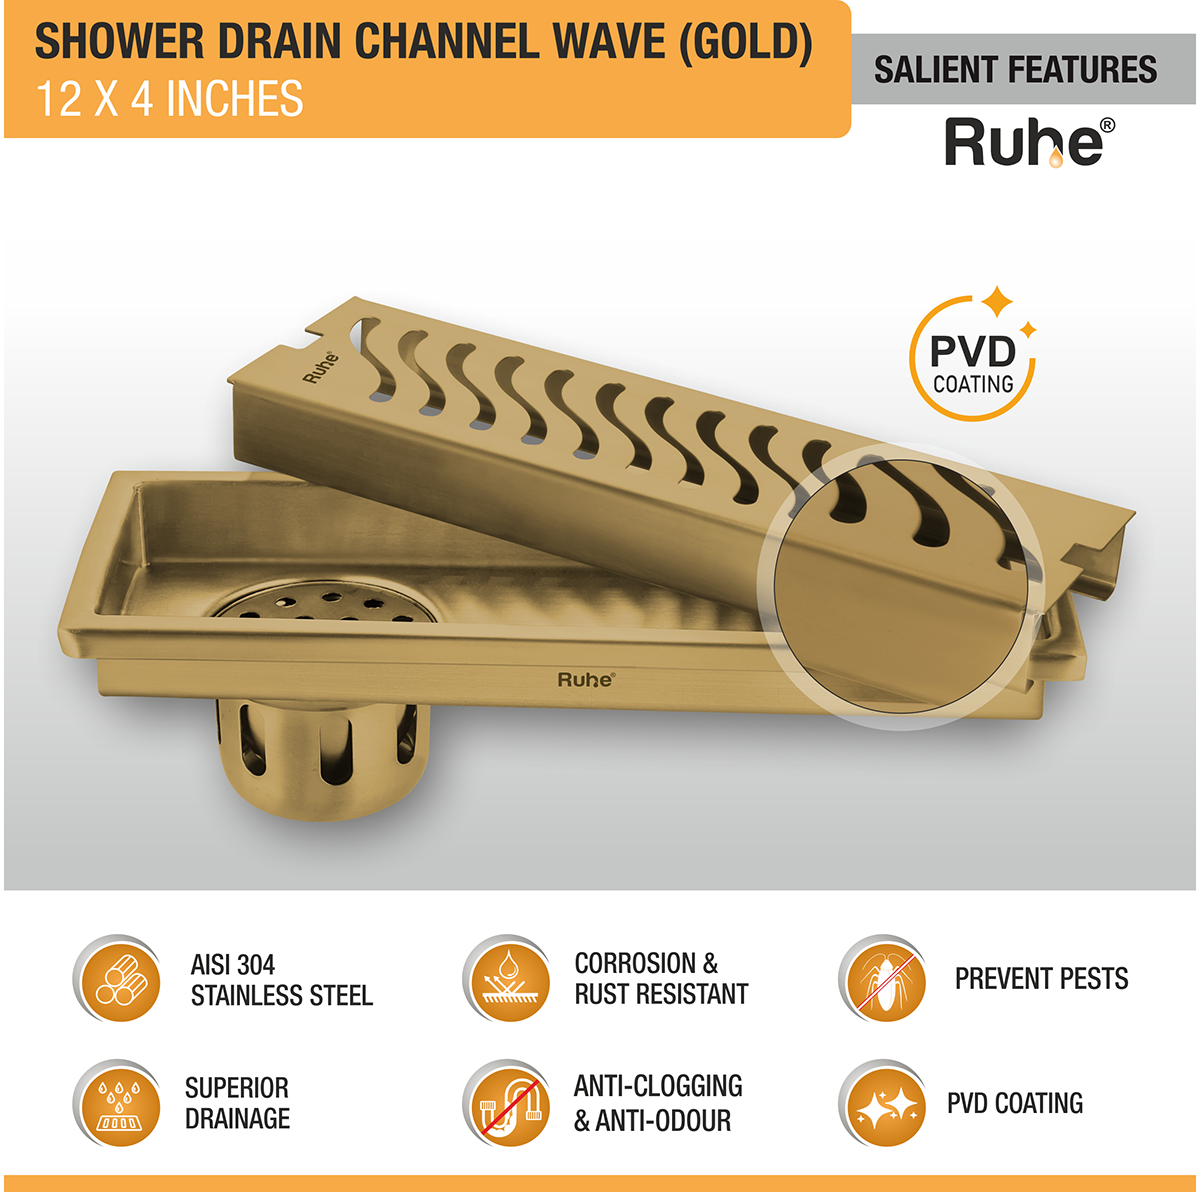 Wave Shower Drain Channel (12 x 4 Inches) YELLOW GOLD features